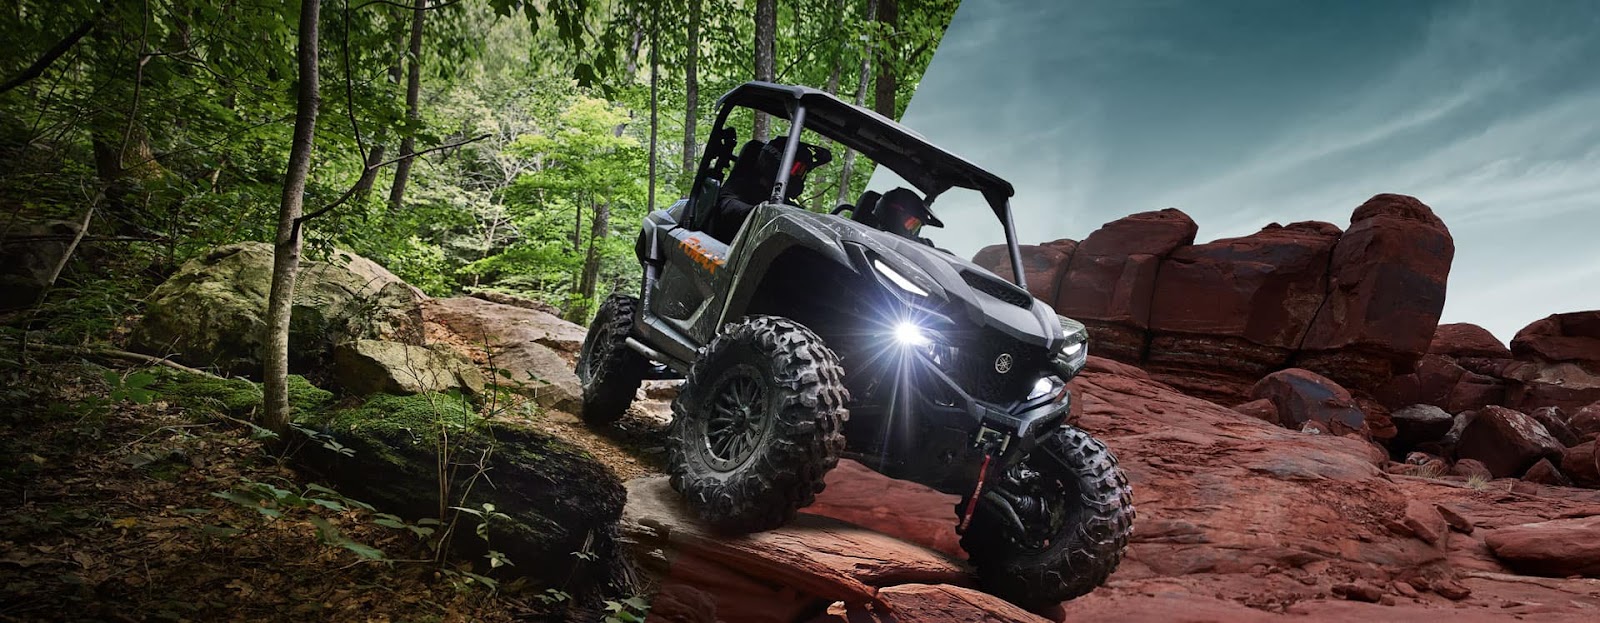 Yamaha Wolverine RMAX2 conquering rocky terrain on off-road trail